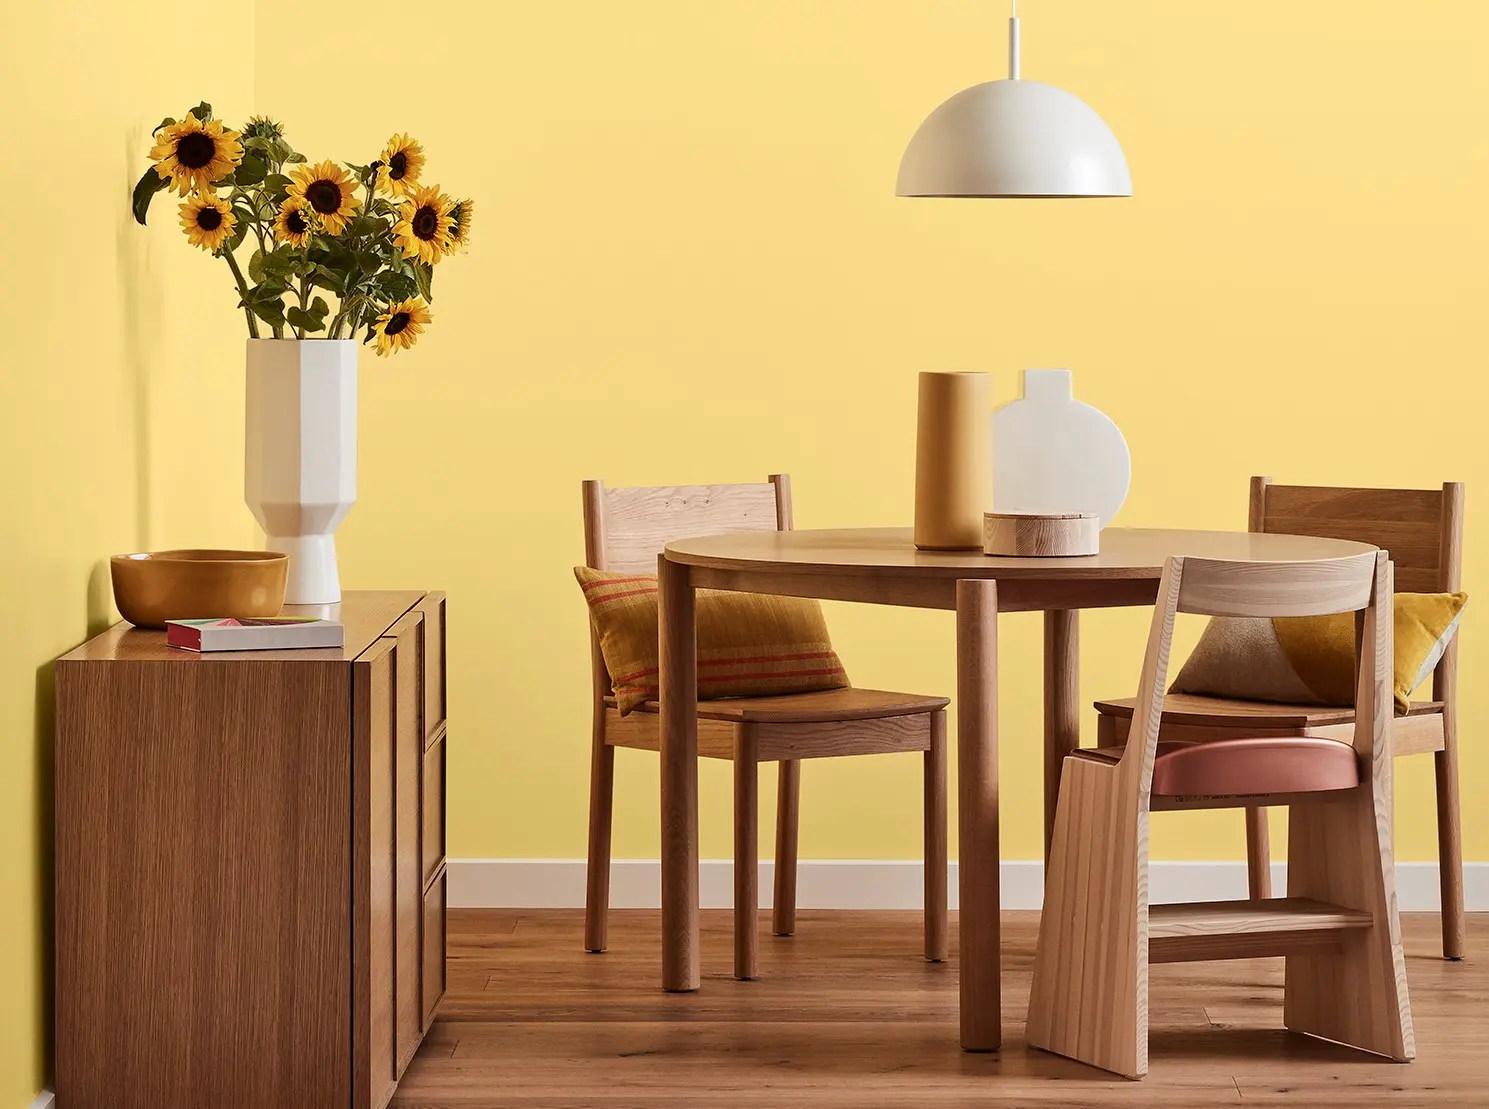 Yellow wall featuring in dining room with decorative items on table and buffet.